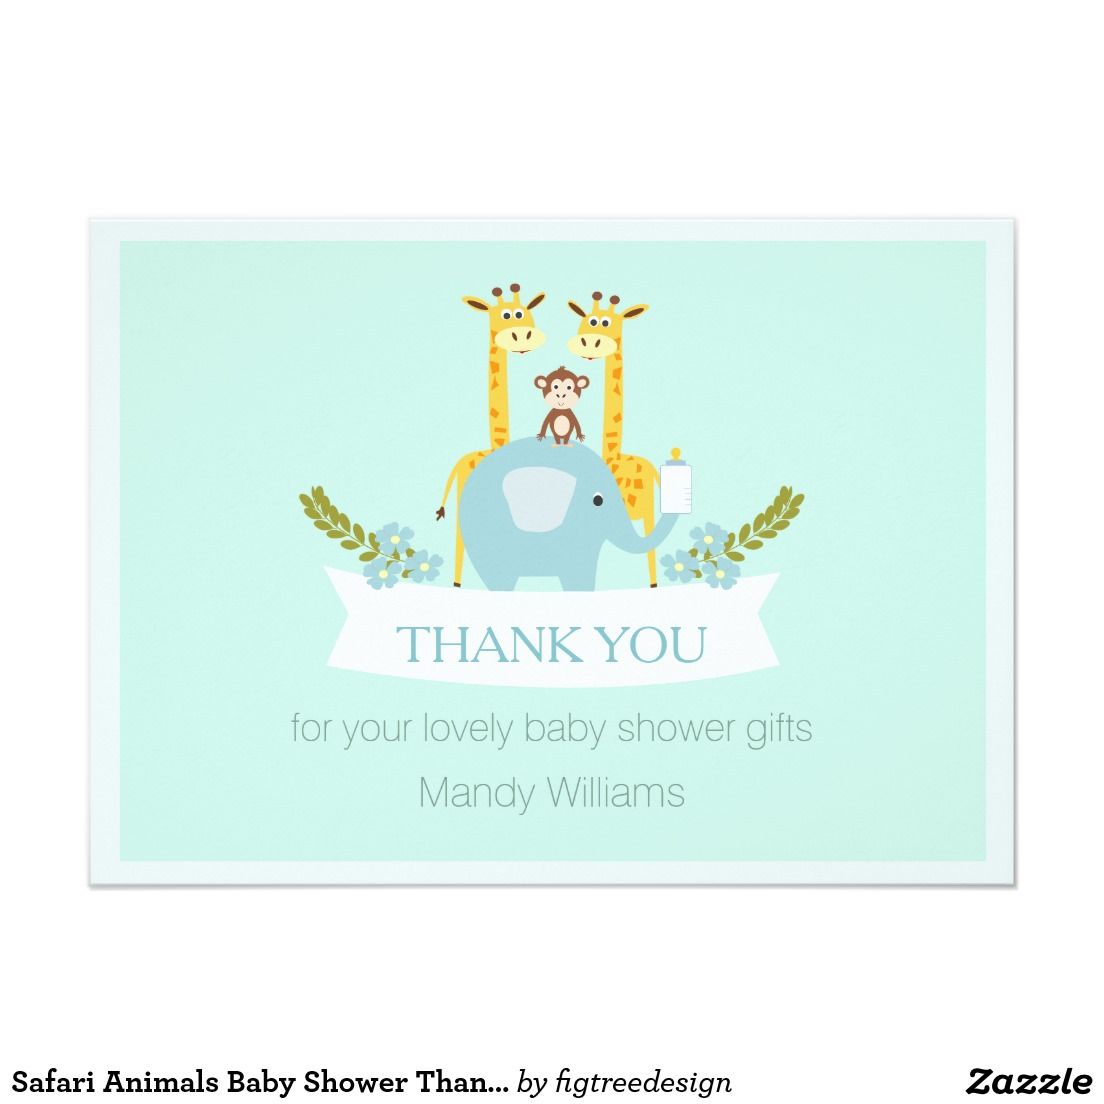 Full Size of Baby Shower:72+ Rousing Baby Shower Thank You Cards Picture Ideas Baby Shower Drinks With Fiesta De Baby Shower Plus Baby Shower Food Boy Together With Baby Shower Venues Near Me